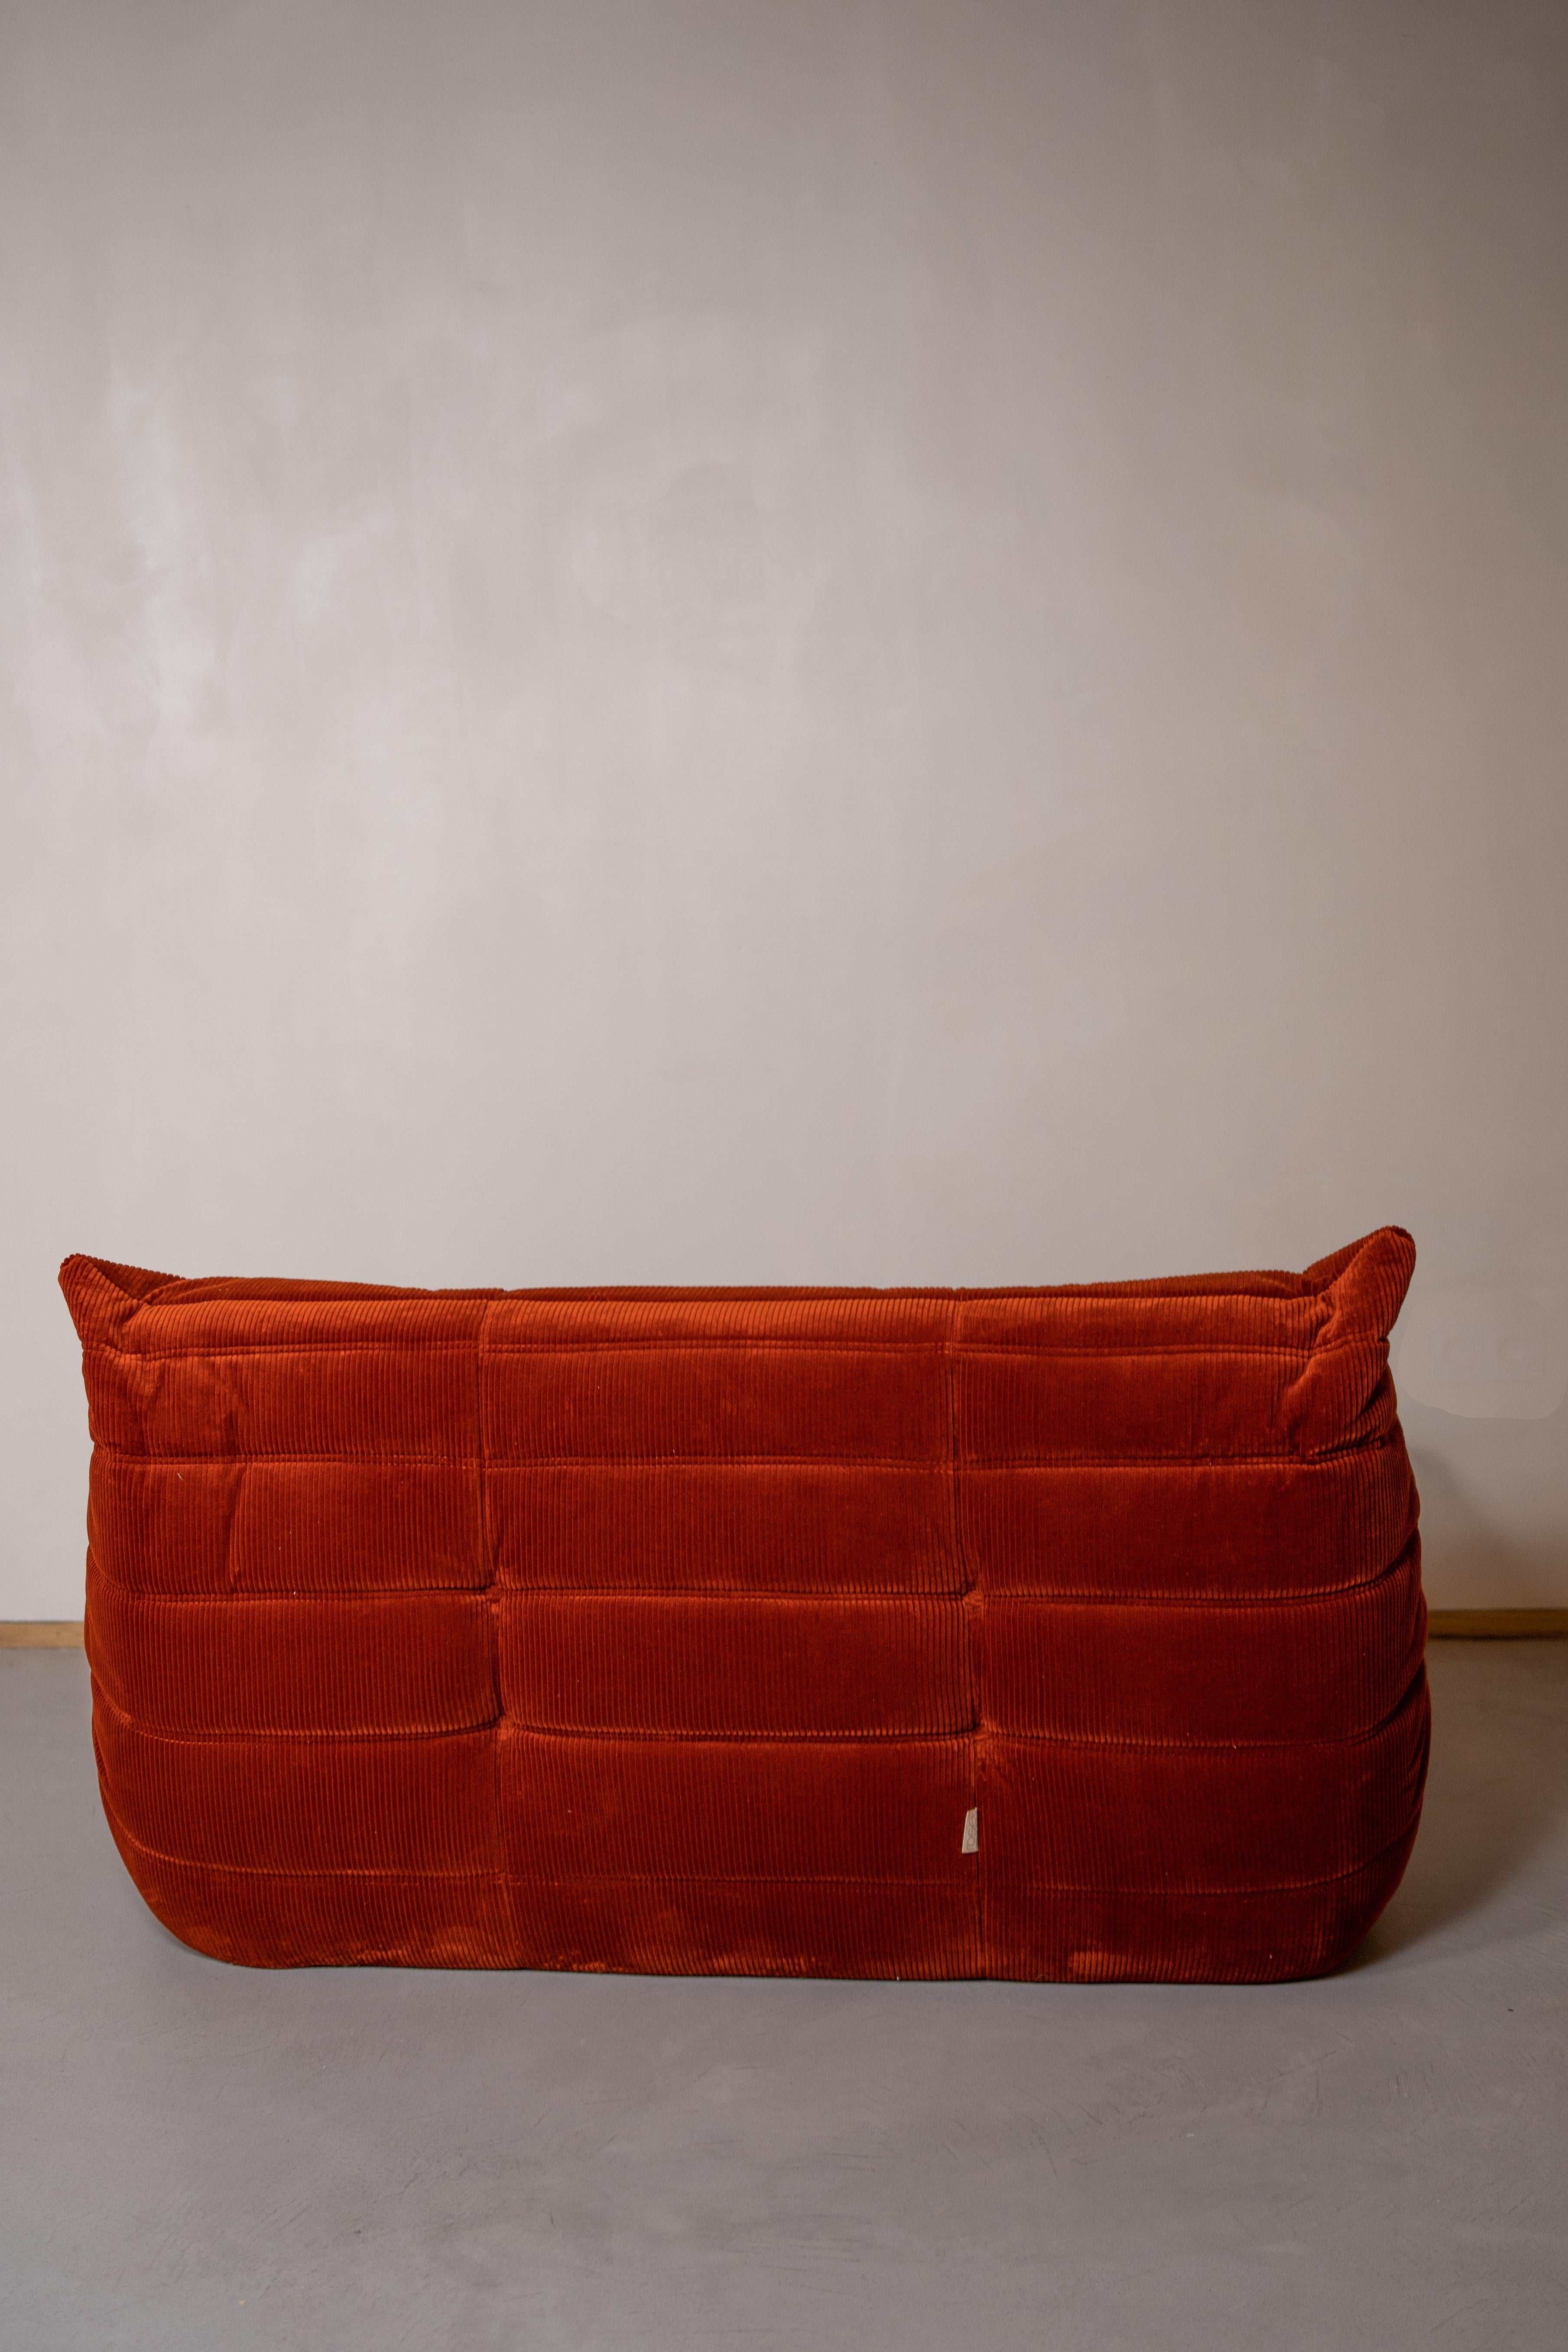 20th Century Togo Sofa by Michel Ducaroy, 5 Pieces, for Ligne Roset